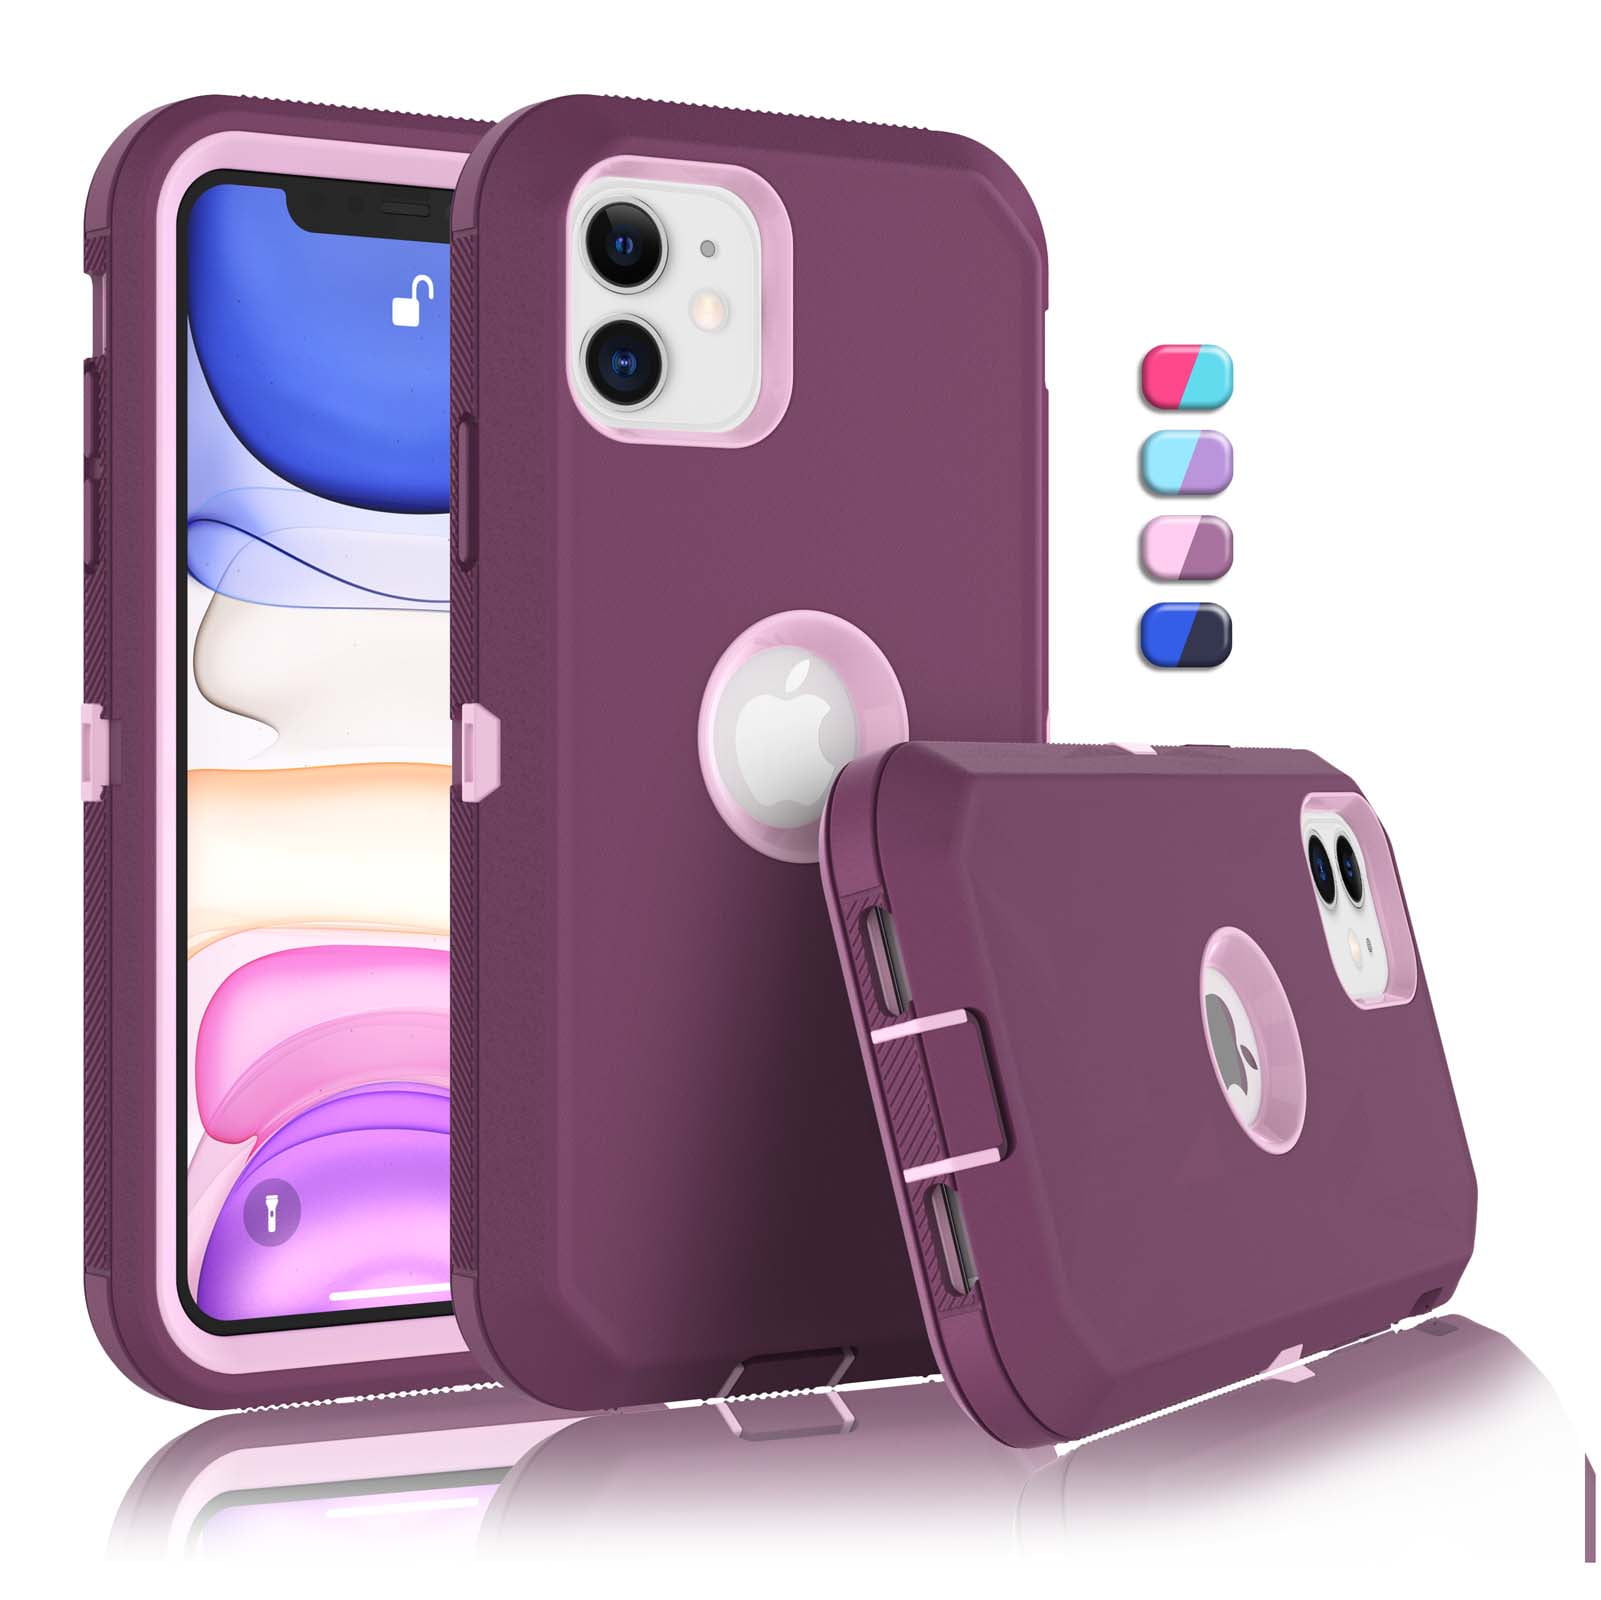 iPhone 11 Cases, Sturdy Phone Case for Apple iPhone 11 6.1", Tekcoo Full-Body Shockproof Protection Armor Hard Plastic & Shock Absorption Rubber Rugged Bumper 3-in-1 Case Cover Walmart.com